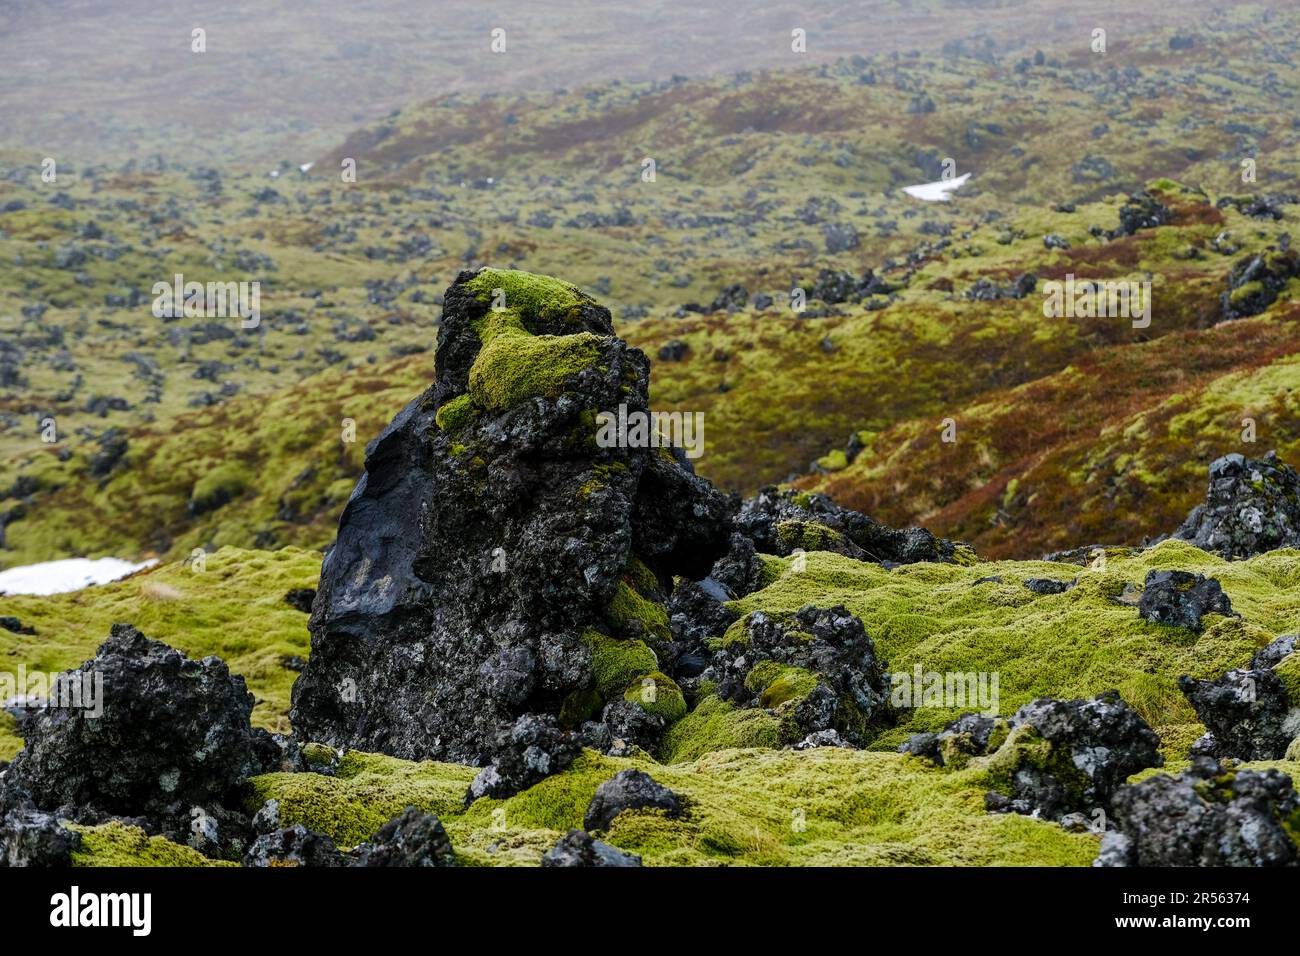 Close-up of a rock formation covered in moss, Iceland Stock Photo